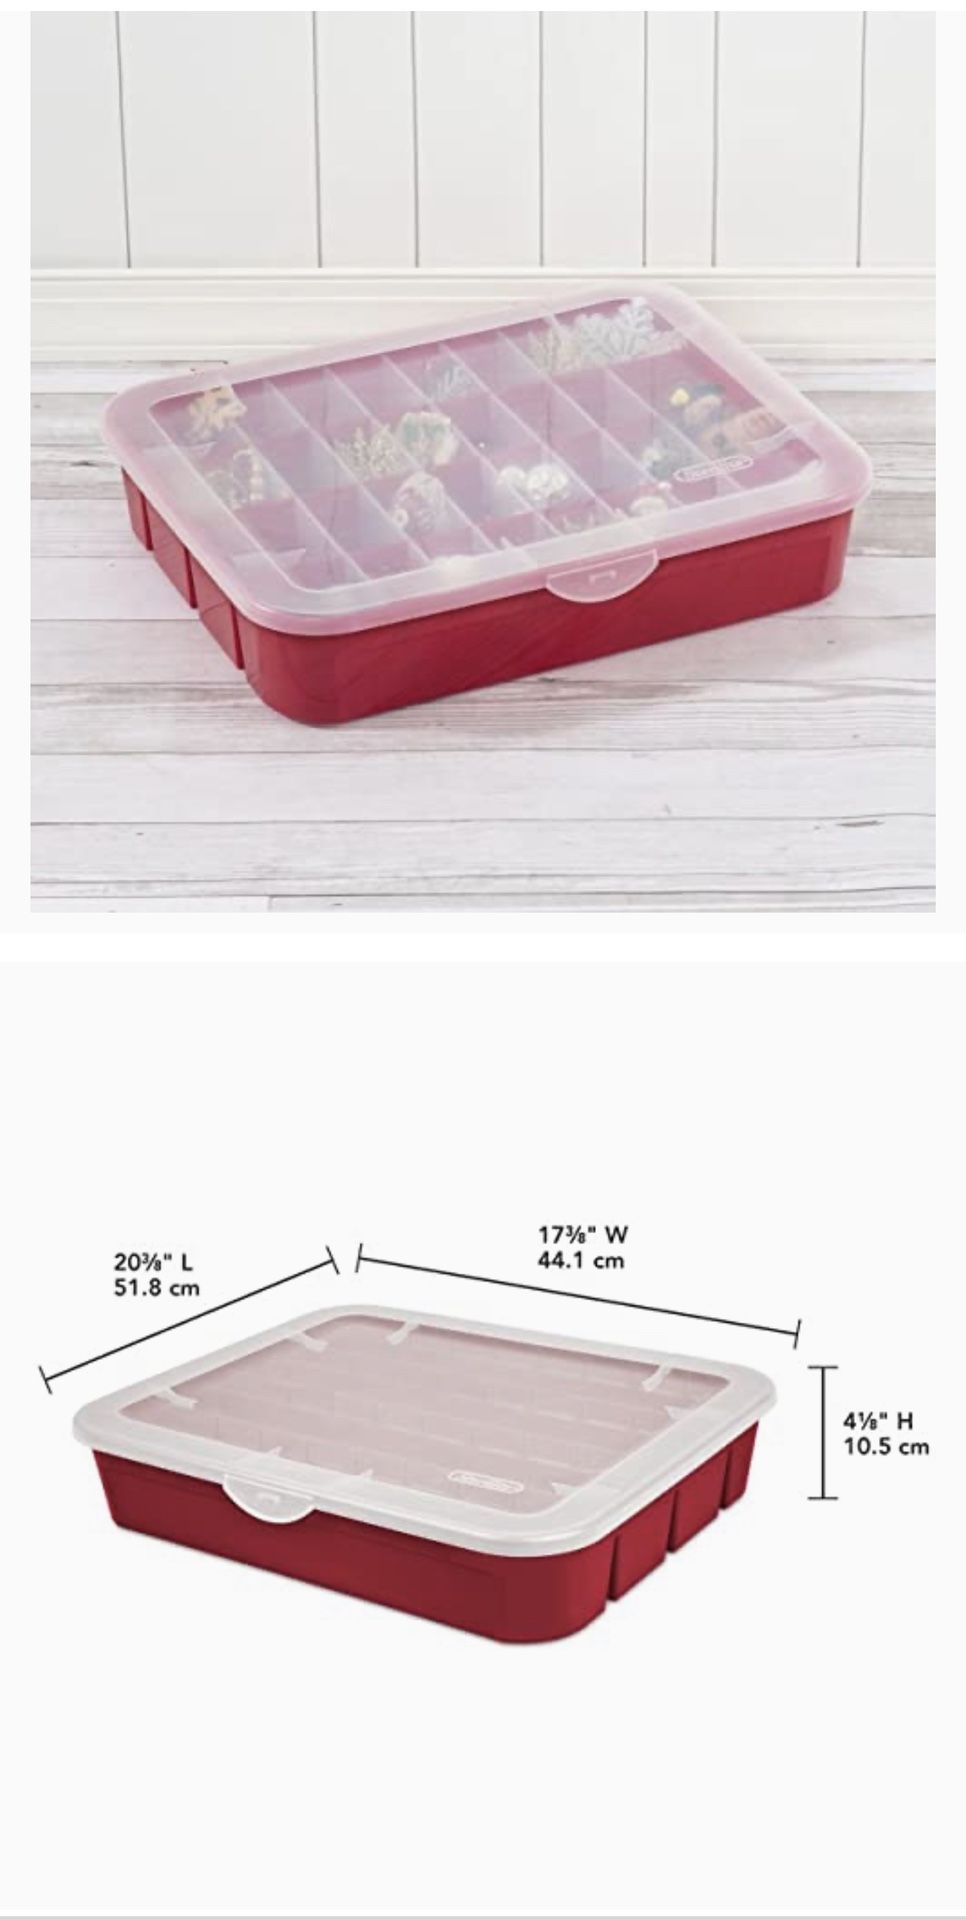 Sterilite Red Holiday Ornament Adjustable Storage Container Organizer Case- Holds 32 Ornaments